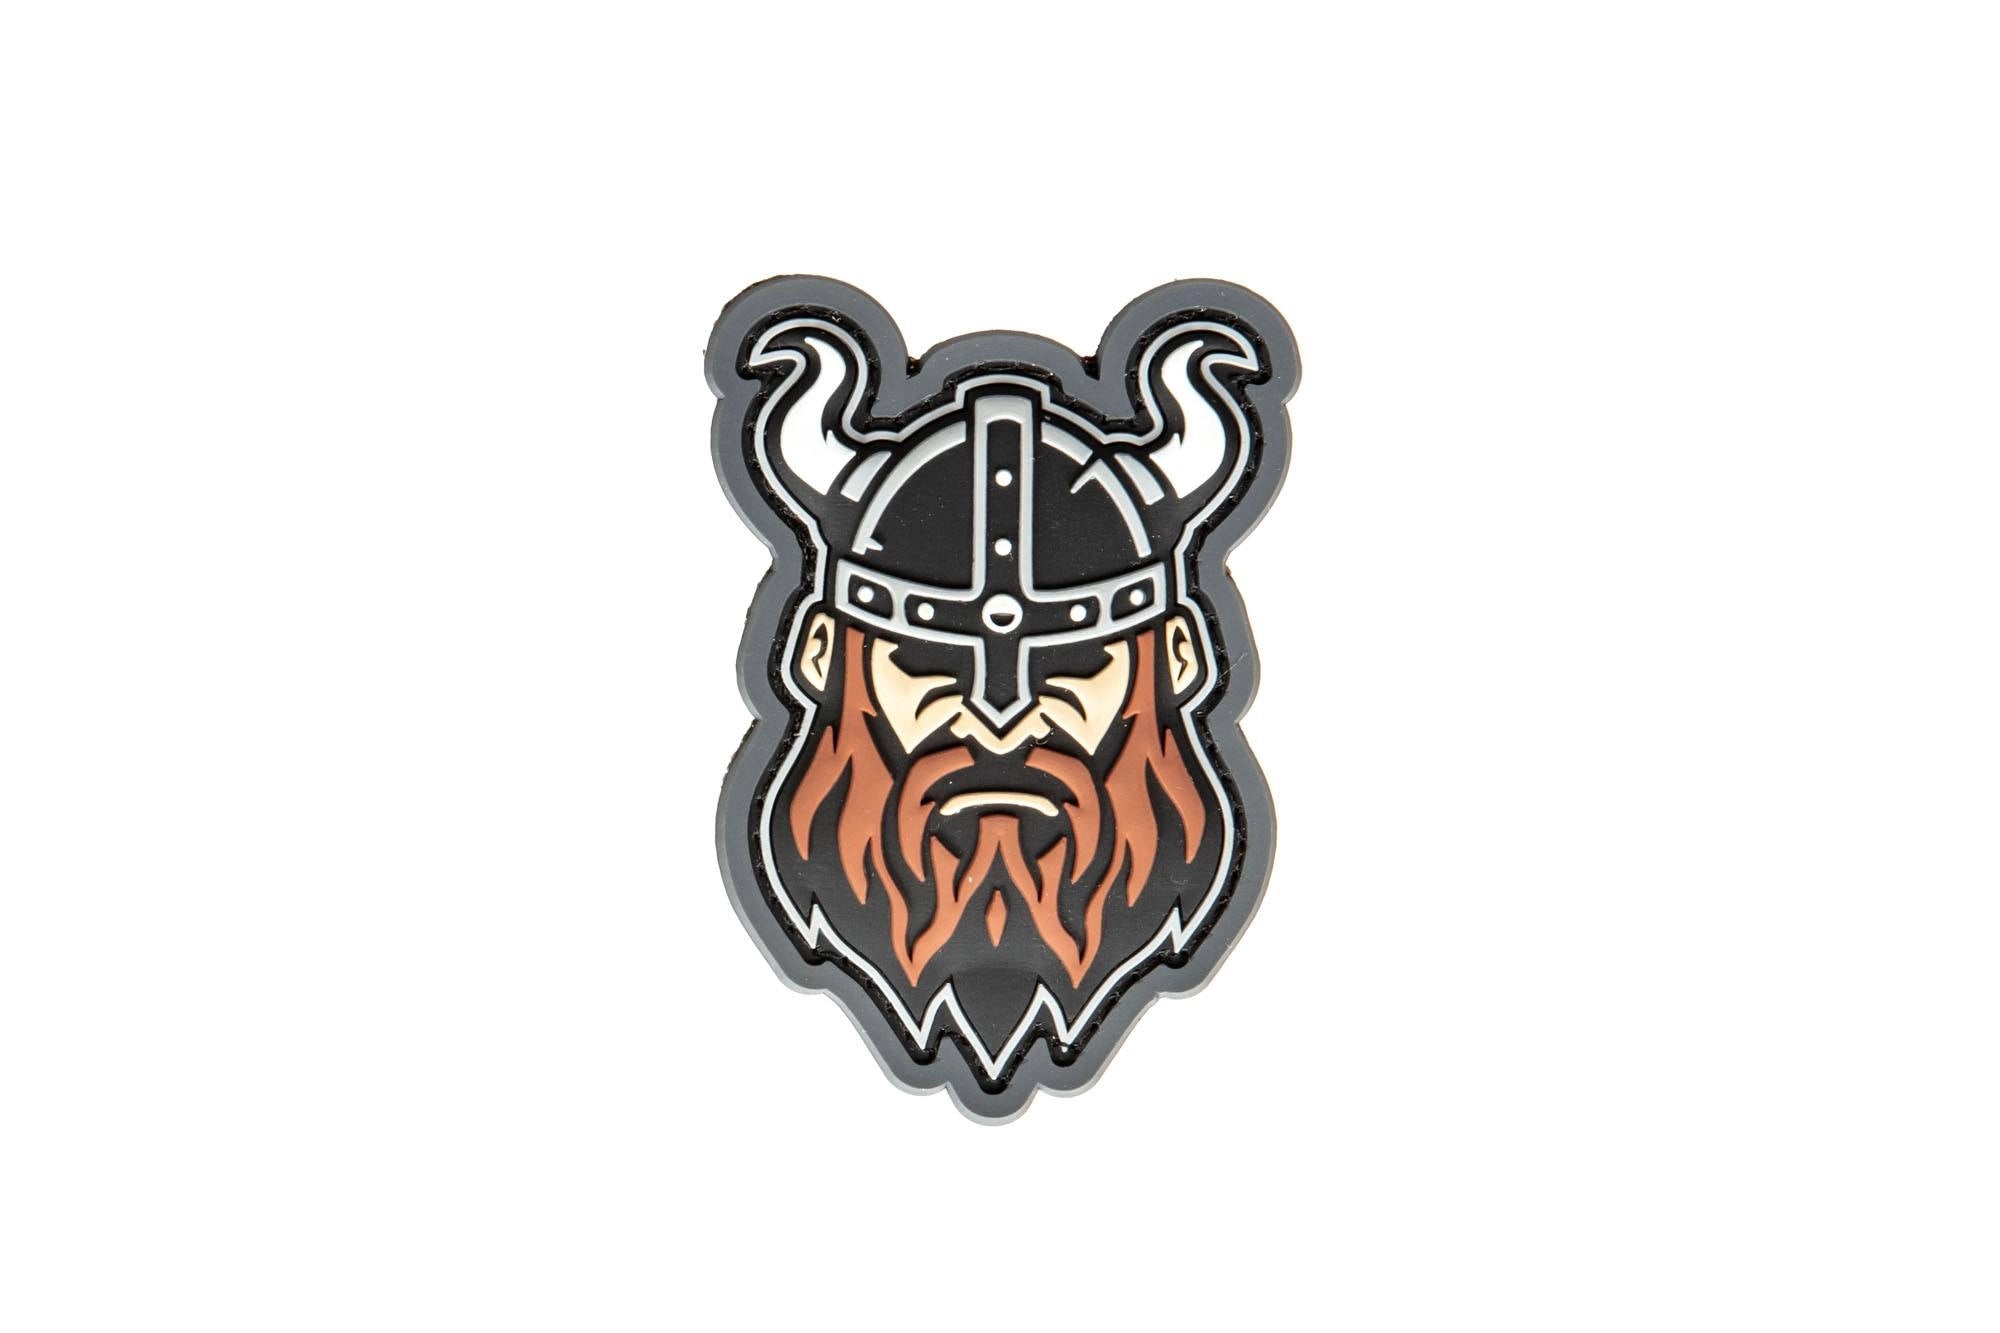 Viking Head Patch - Full color